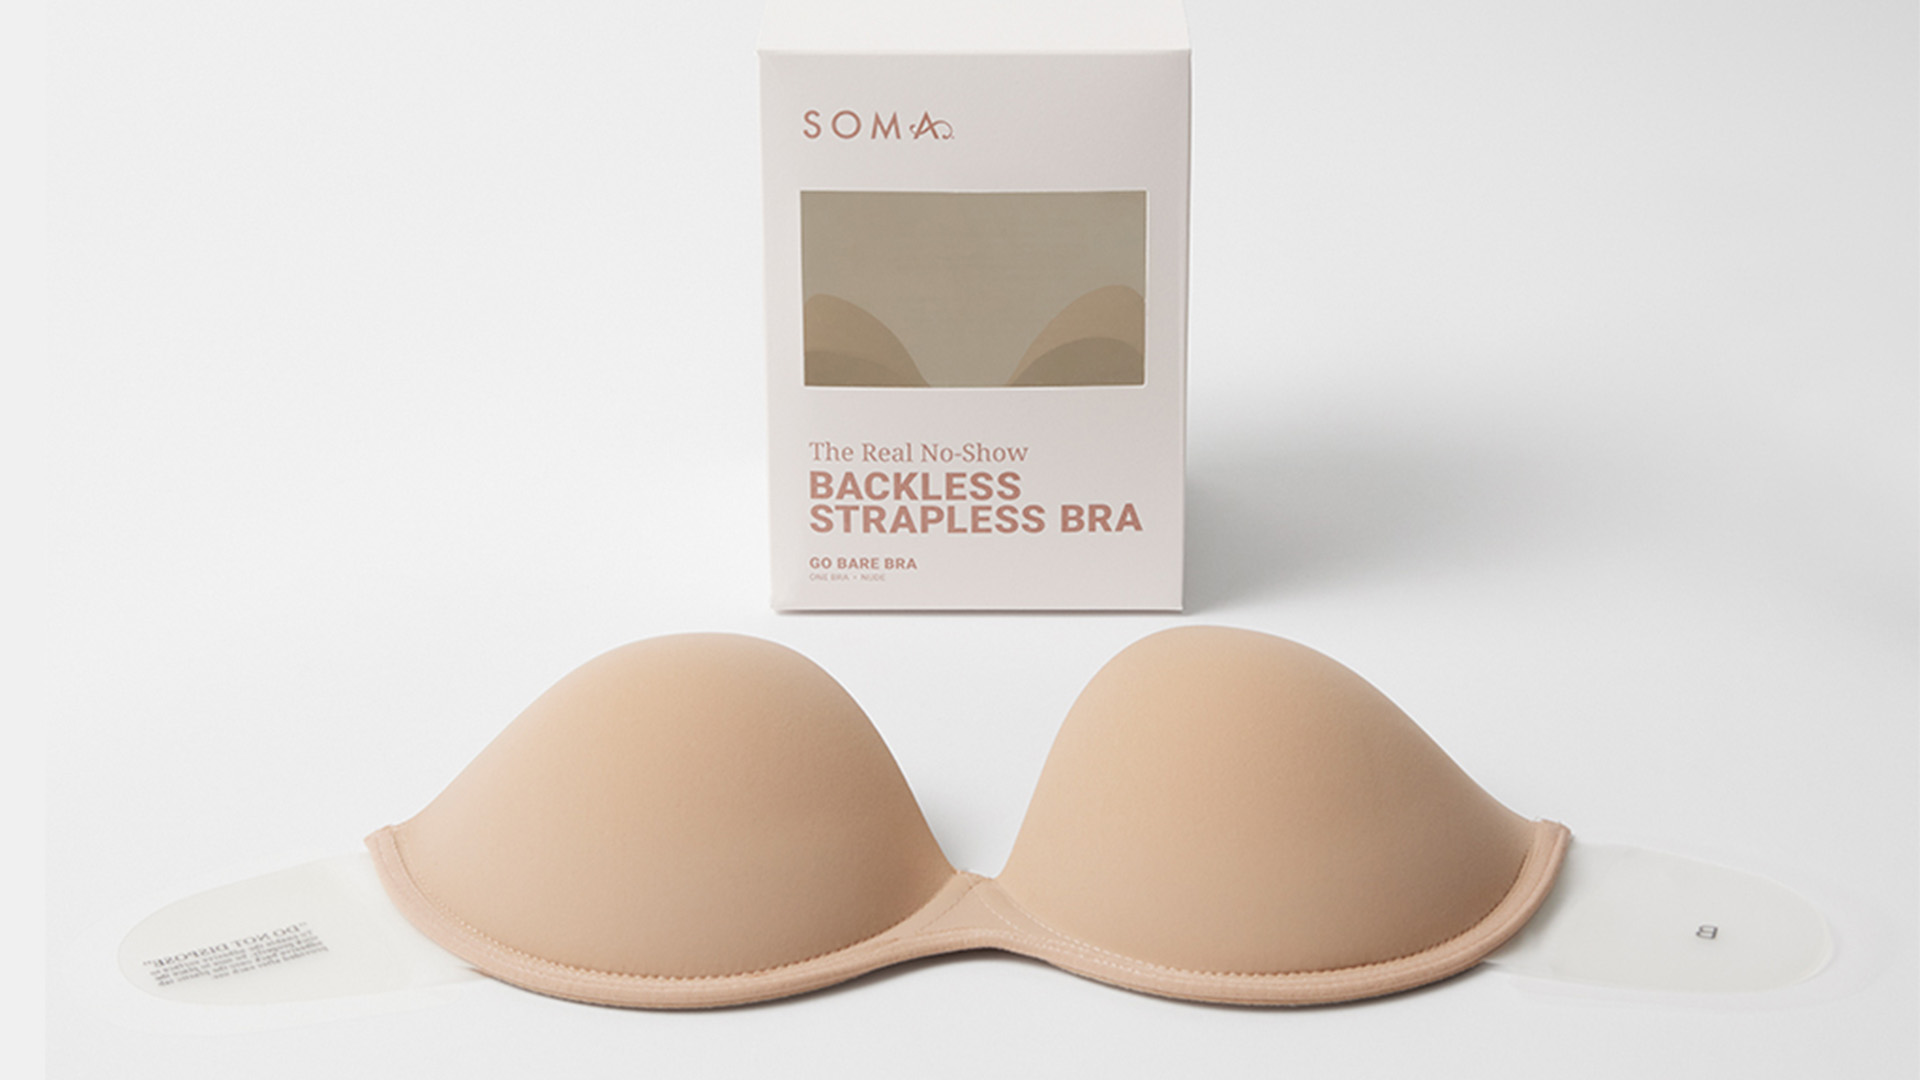 Soma<sup class=st-superscript>®</sup> laydown of nude adhesive backless bra in front of product packaging.